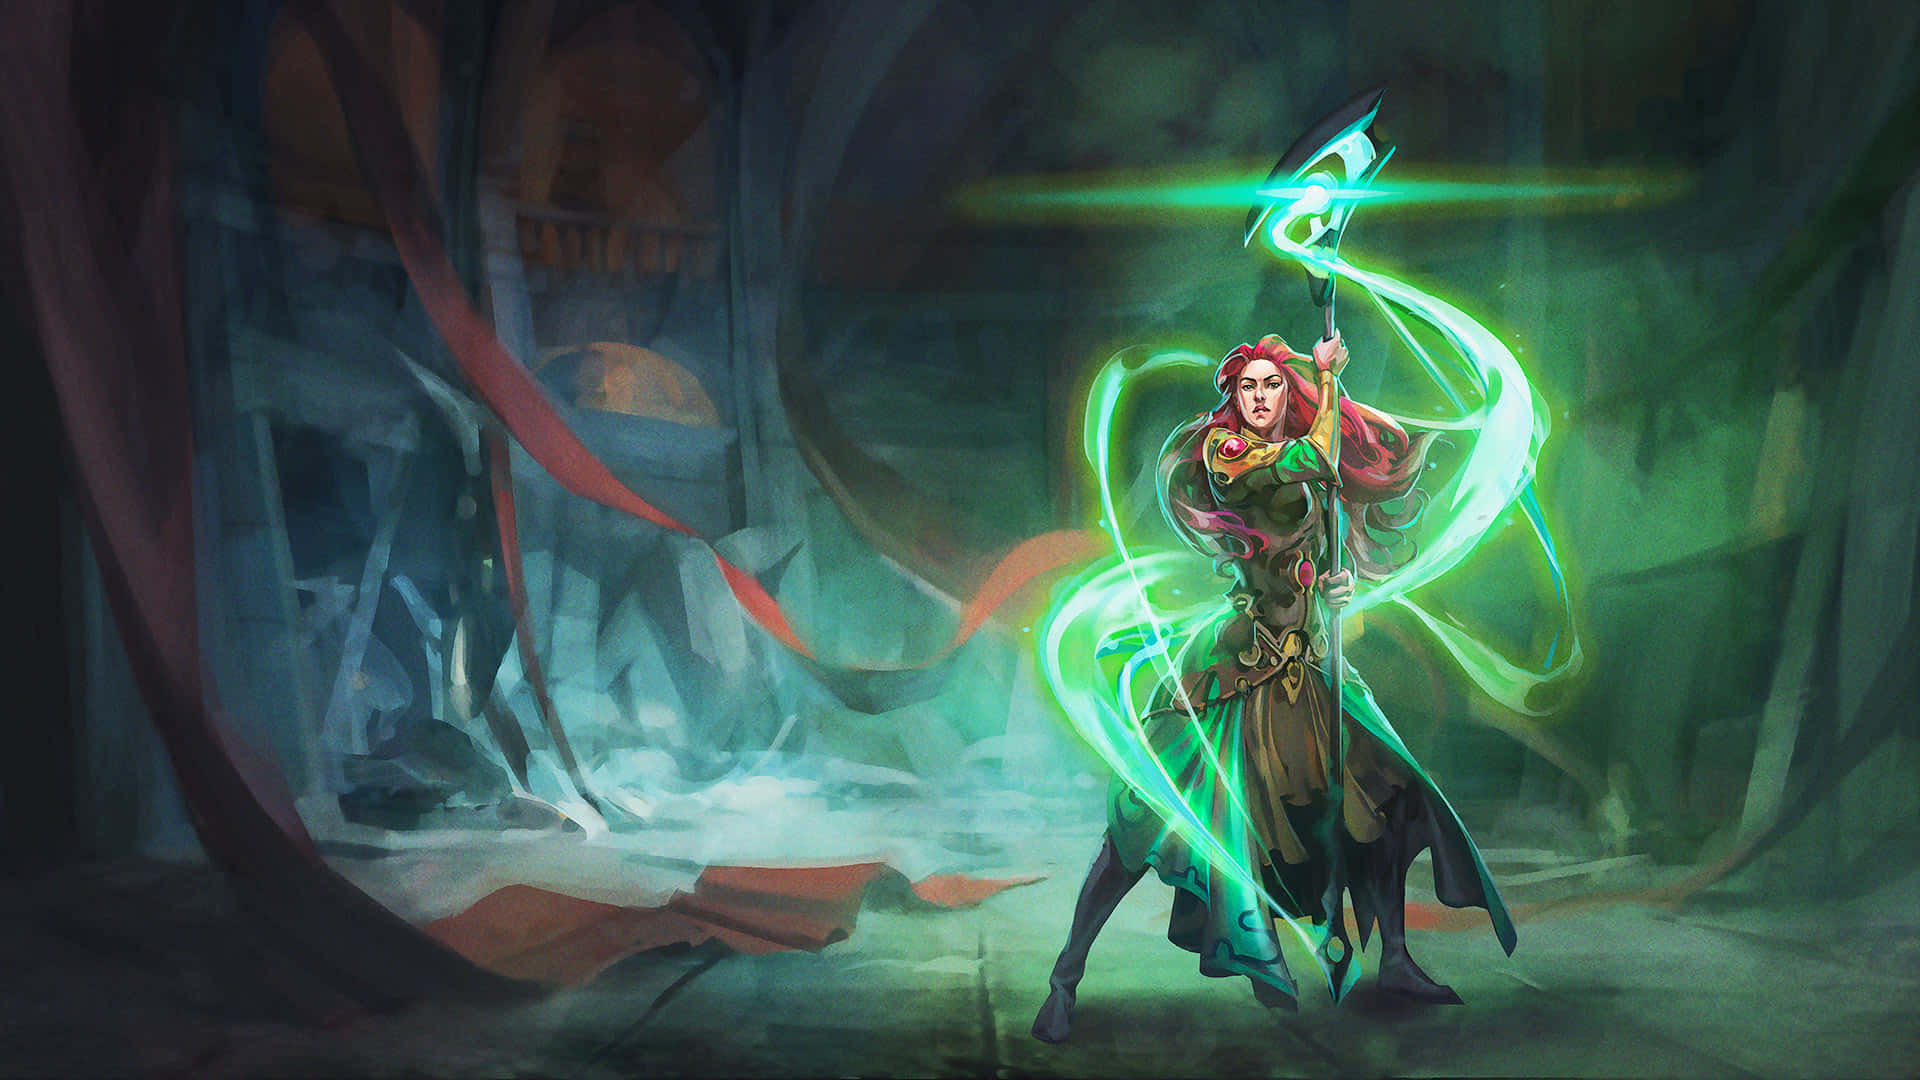 A Woman With Green Hair And A Sword In A Dark Room